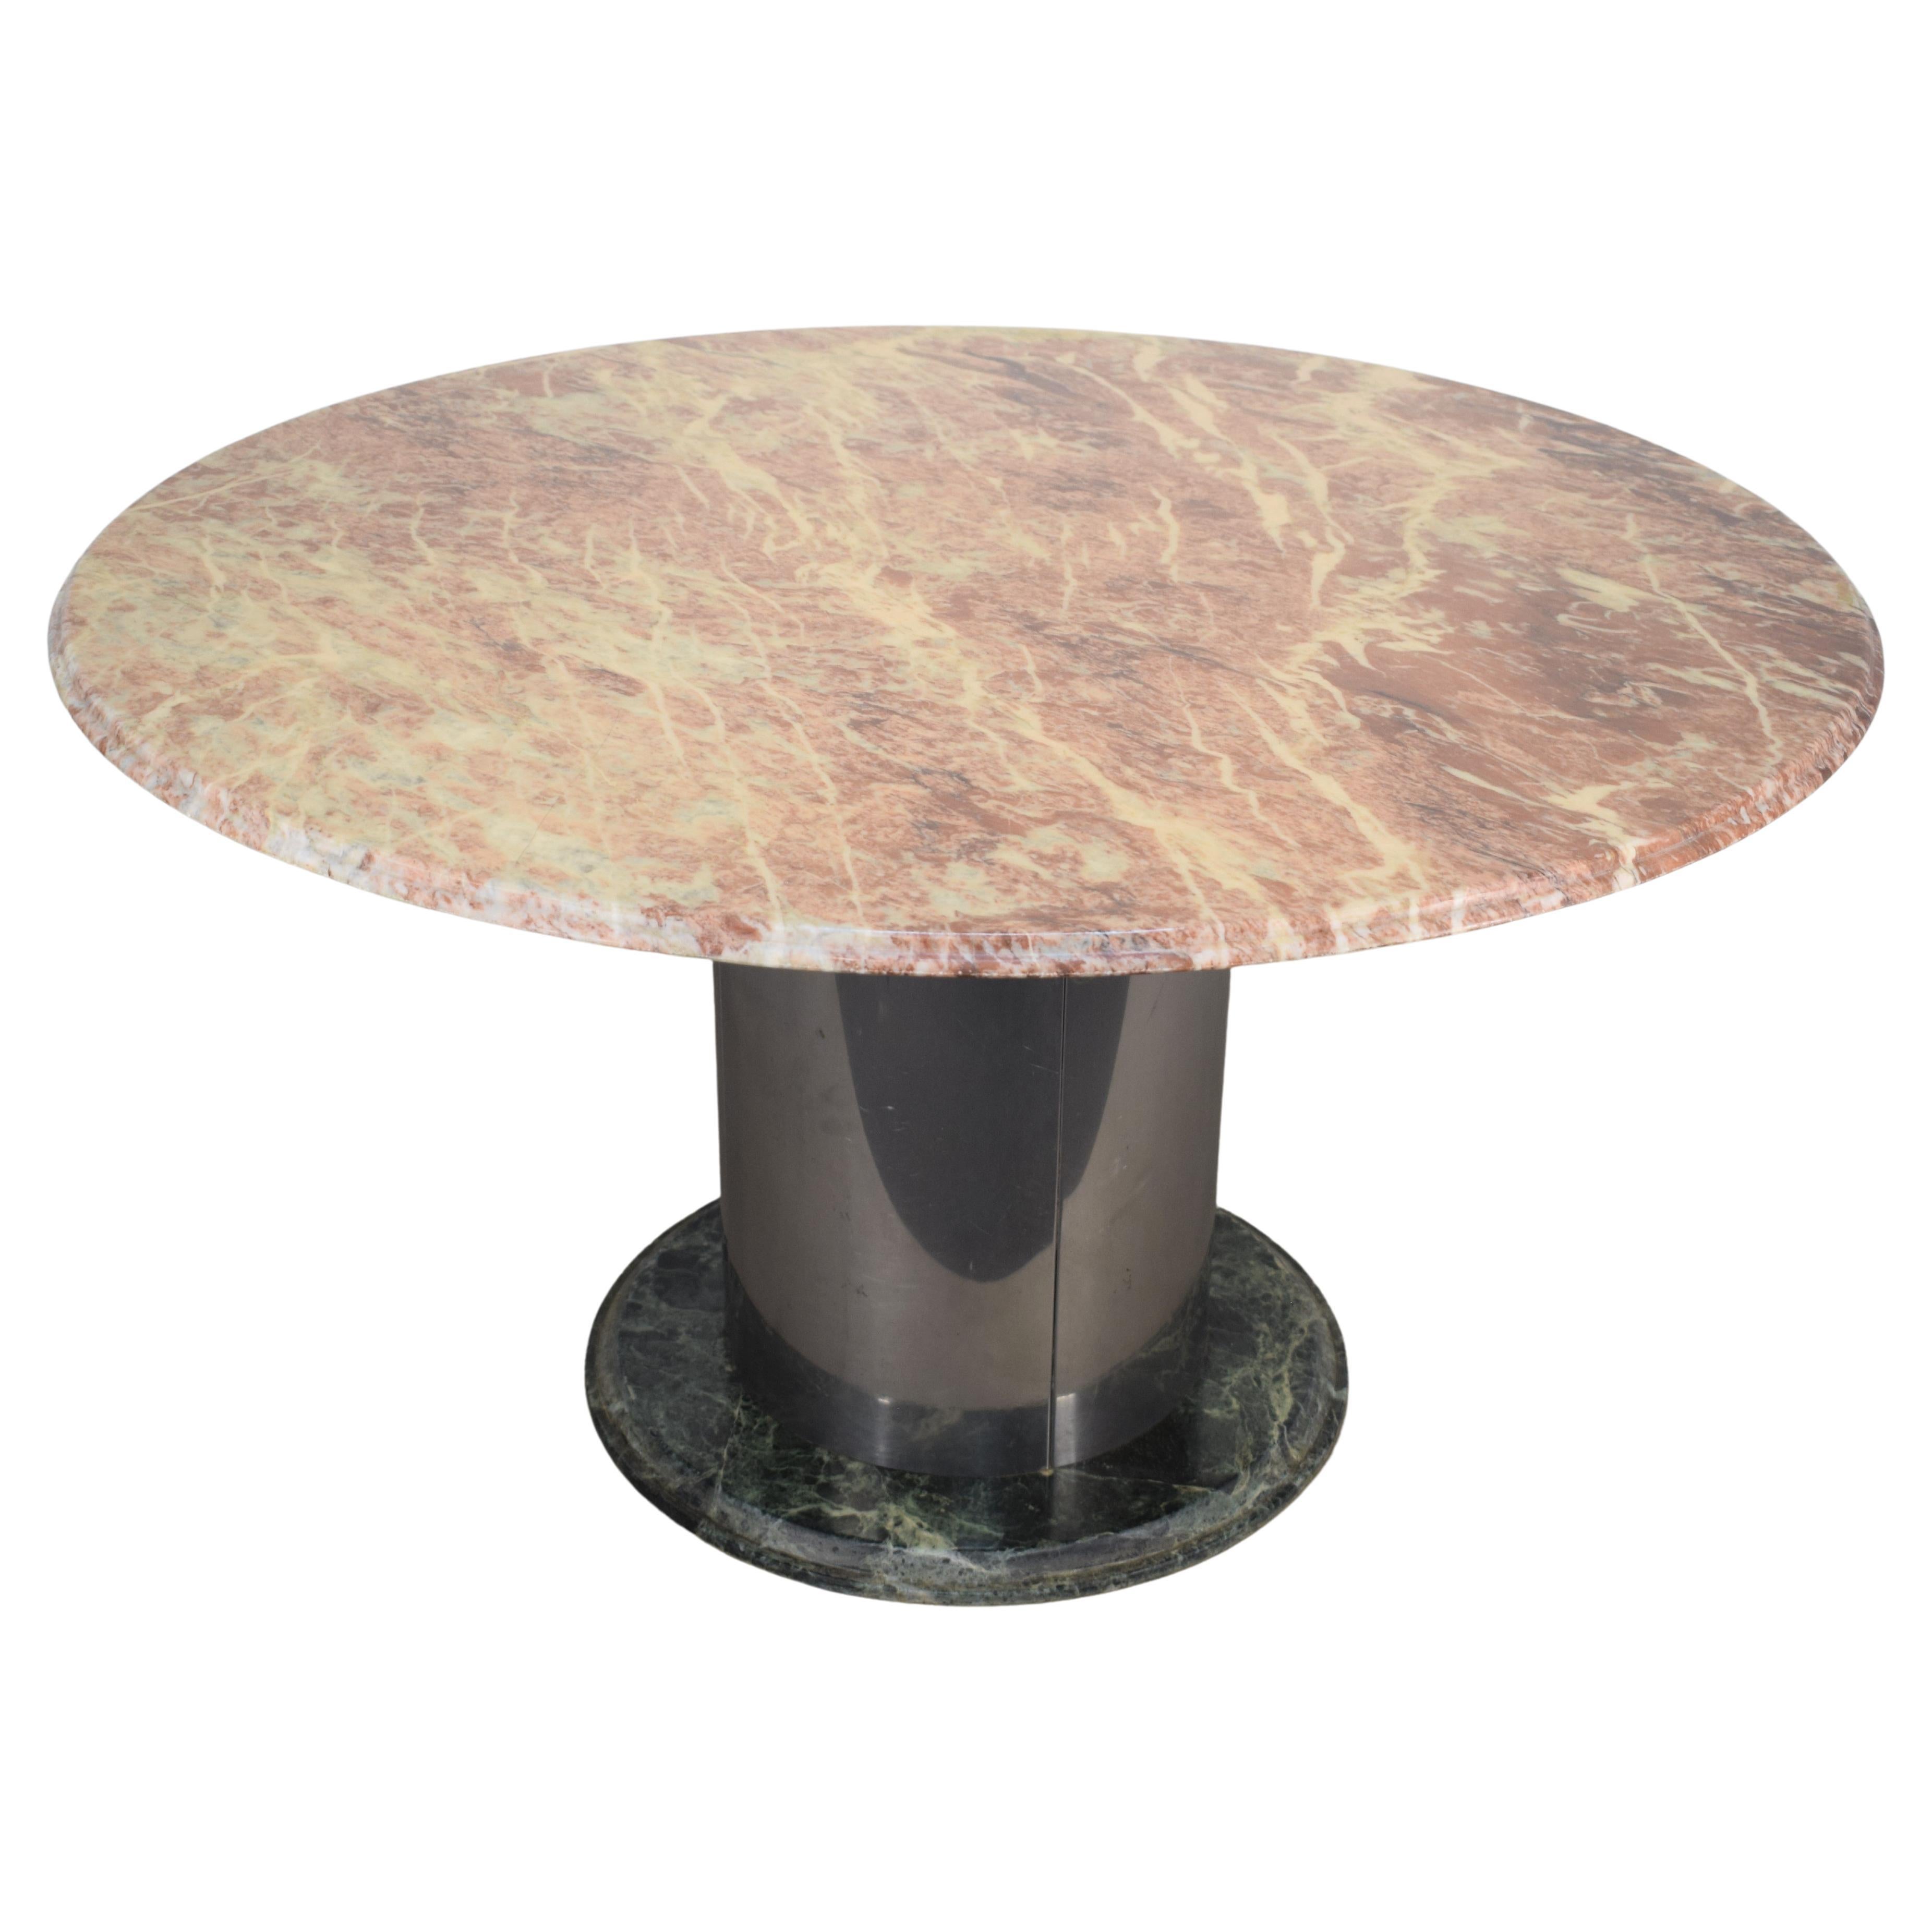 Italian Round Table, Marble and Steel, 1970s